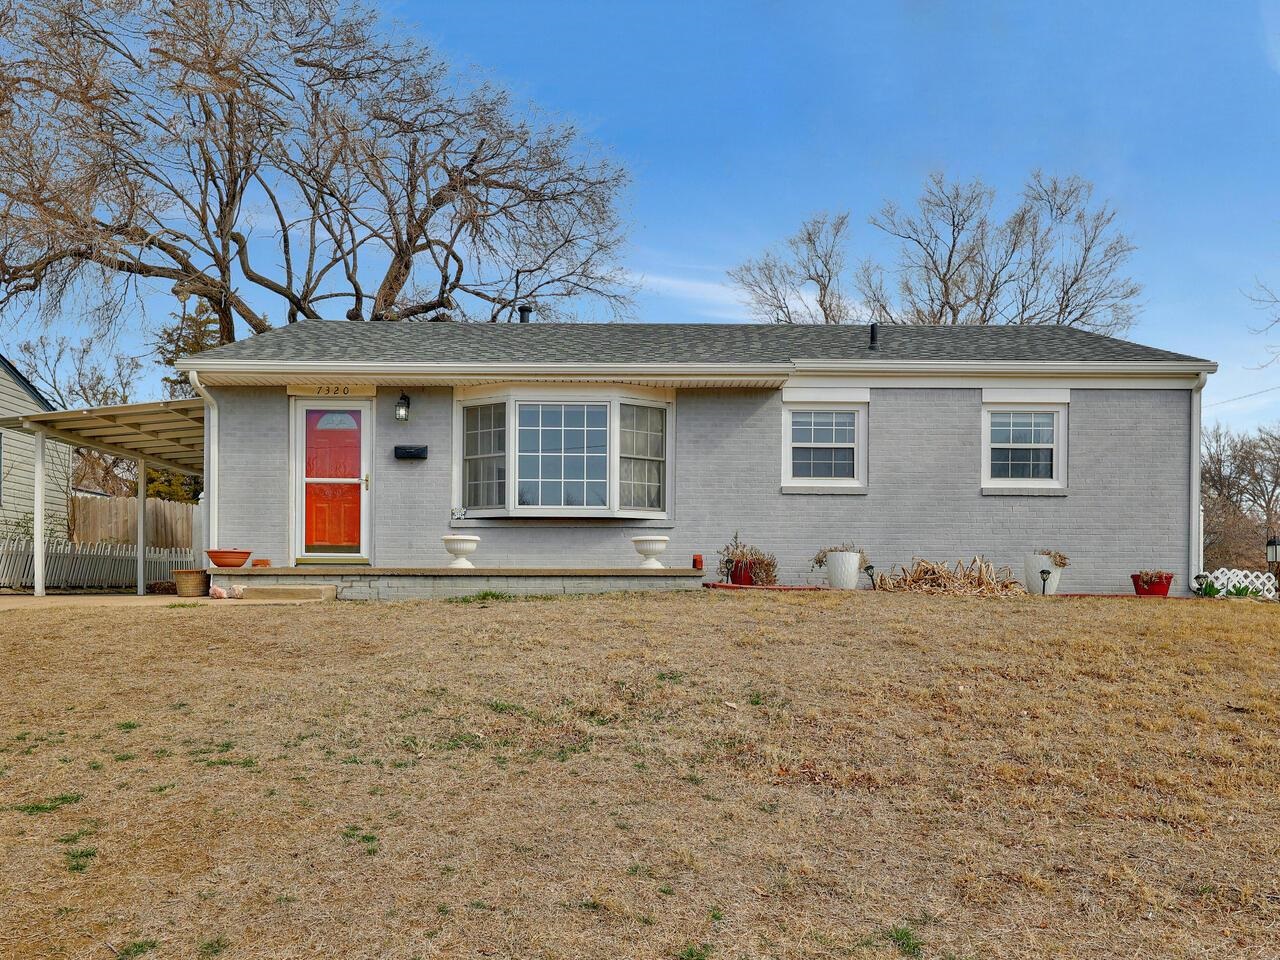 This well maintained 3 bedroom, 1 bath home in east Wichita is move-in ready!  Many updates includin